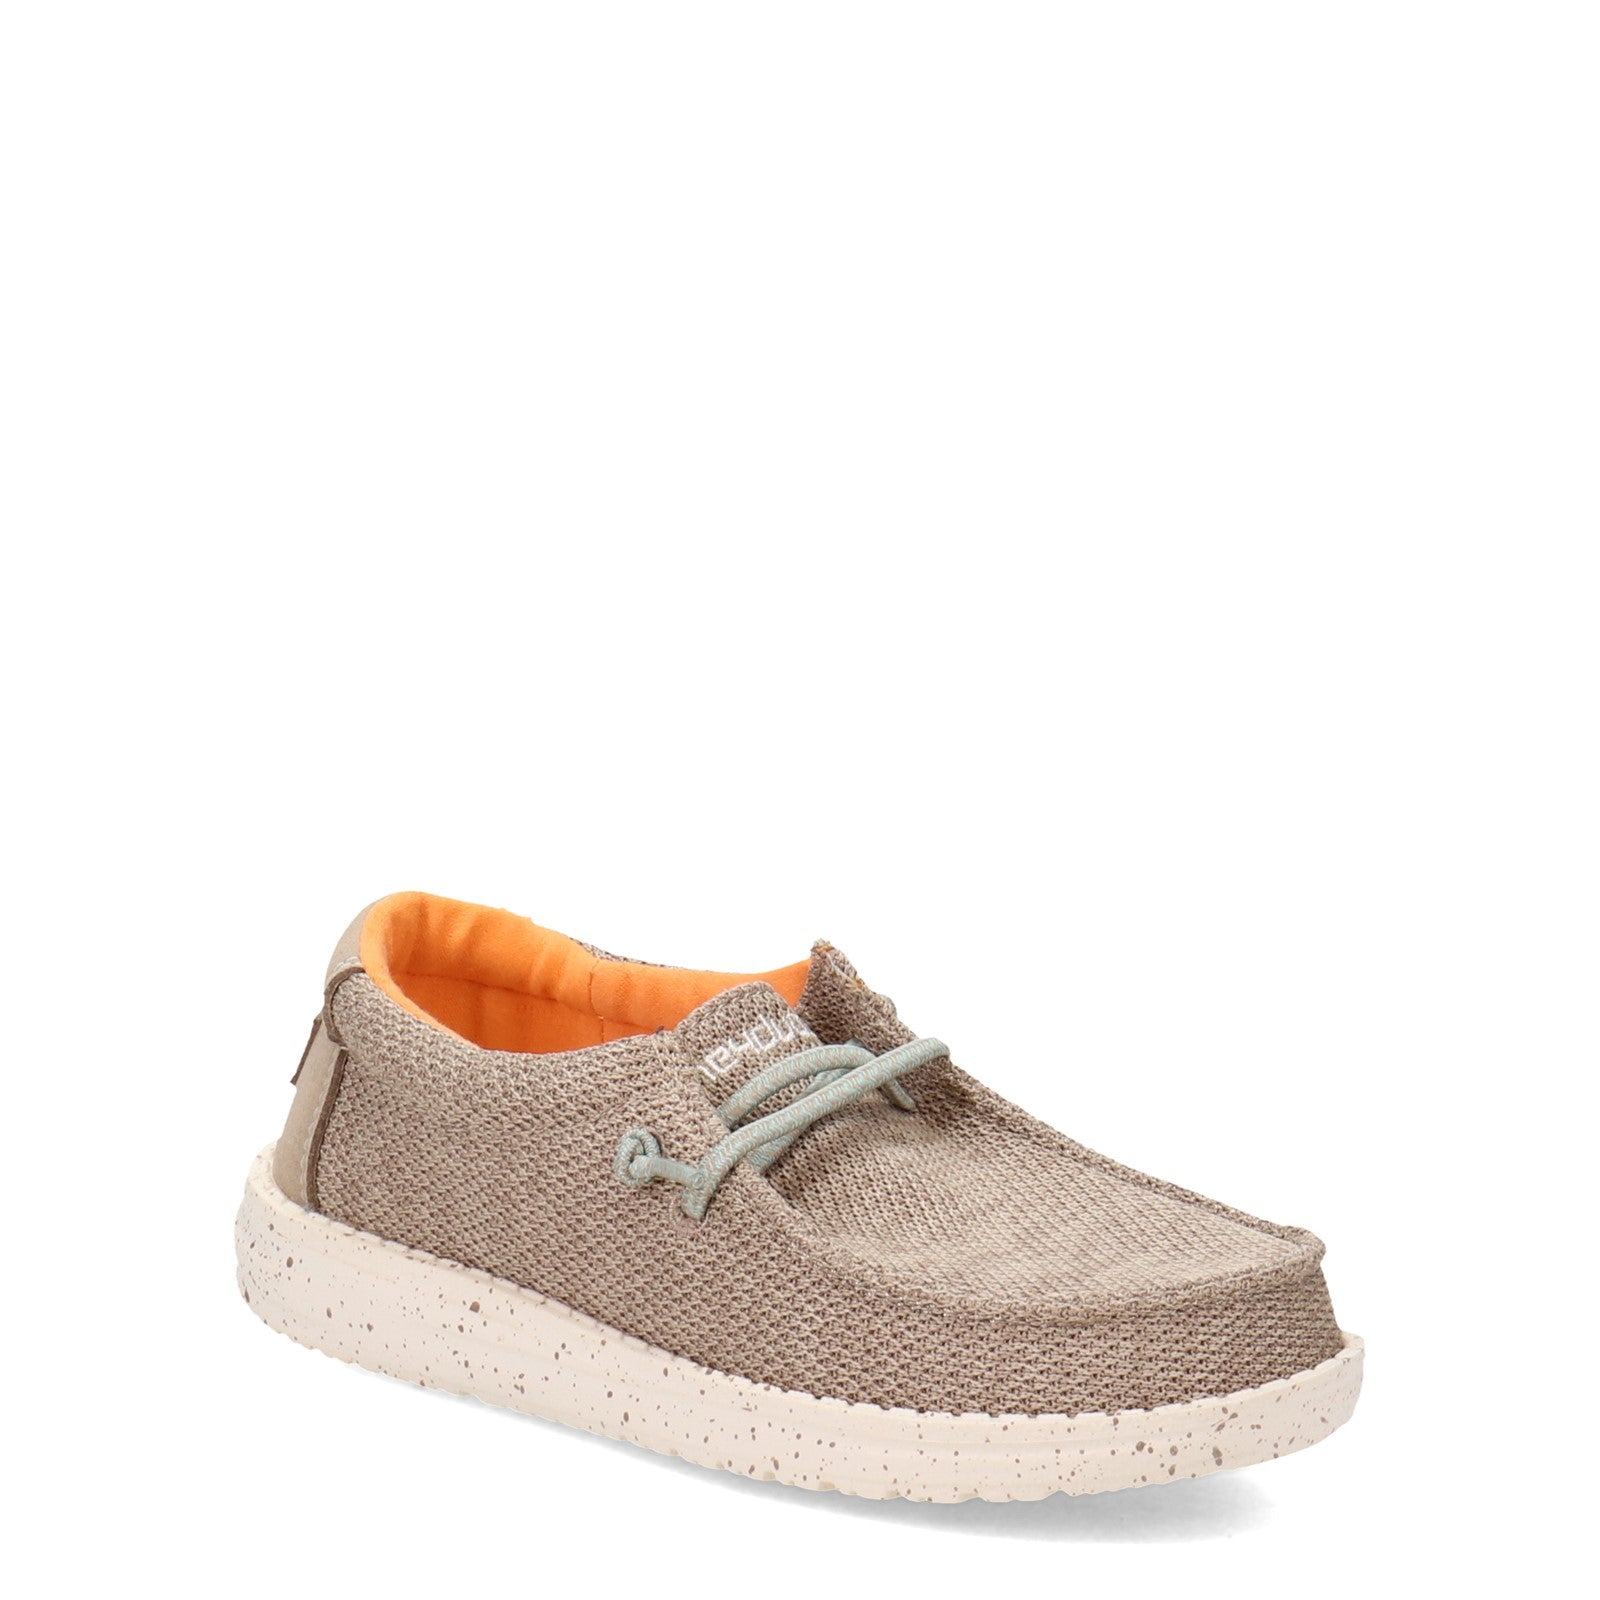 Hey Dude Cody Craft Linen, Womens Slip on Casual Shoes